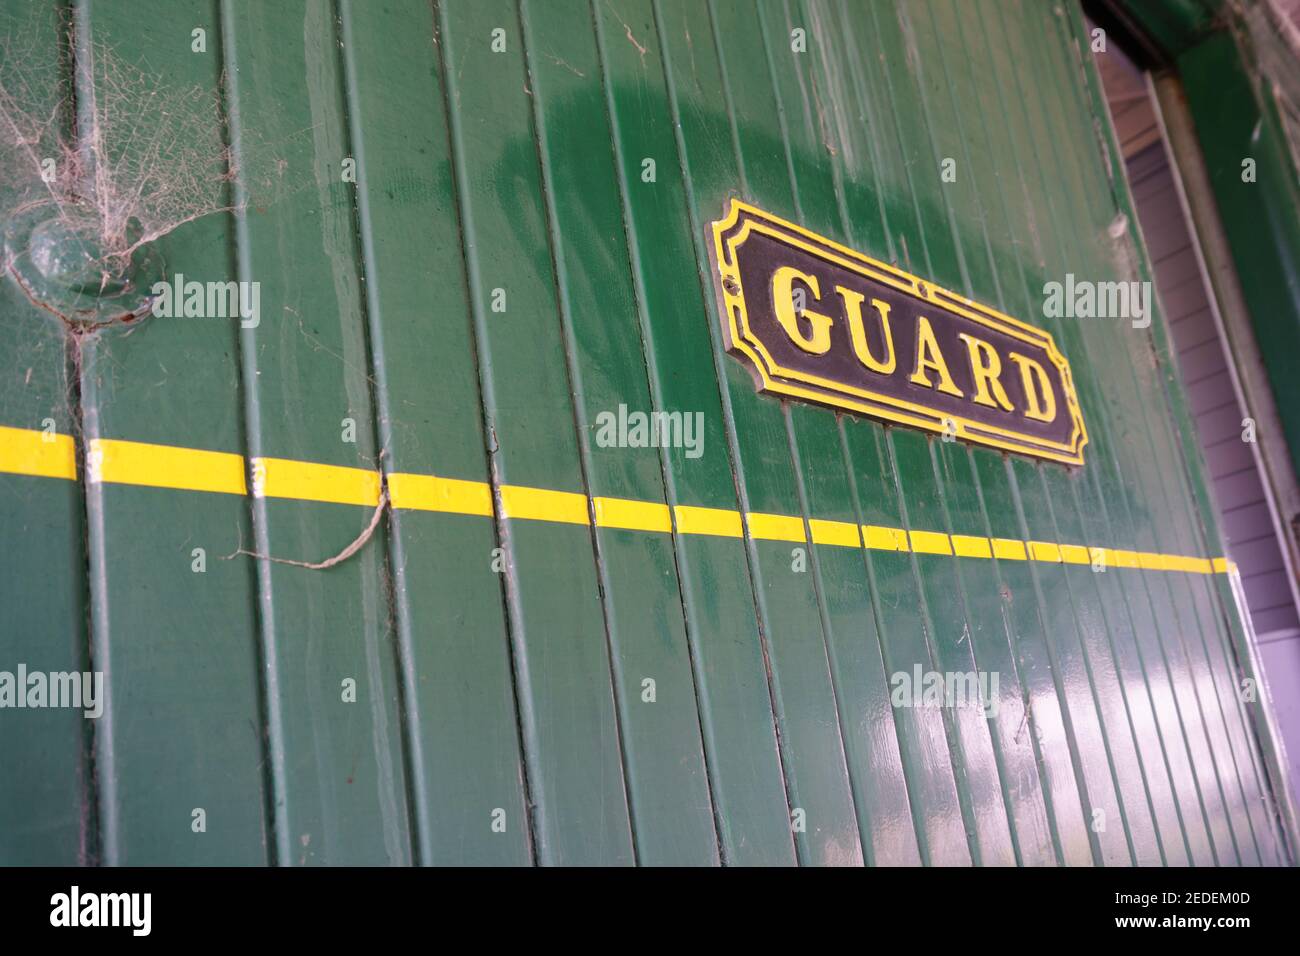 Queenstown New Zealand - February 28 2015; Old-world transportation images of close-up signs or components on vintage steam engine train Stock Photo